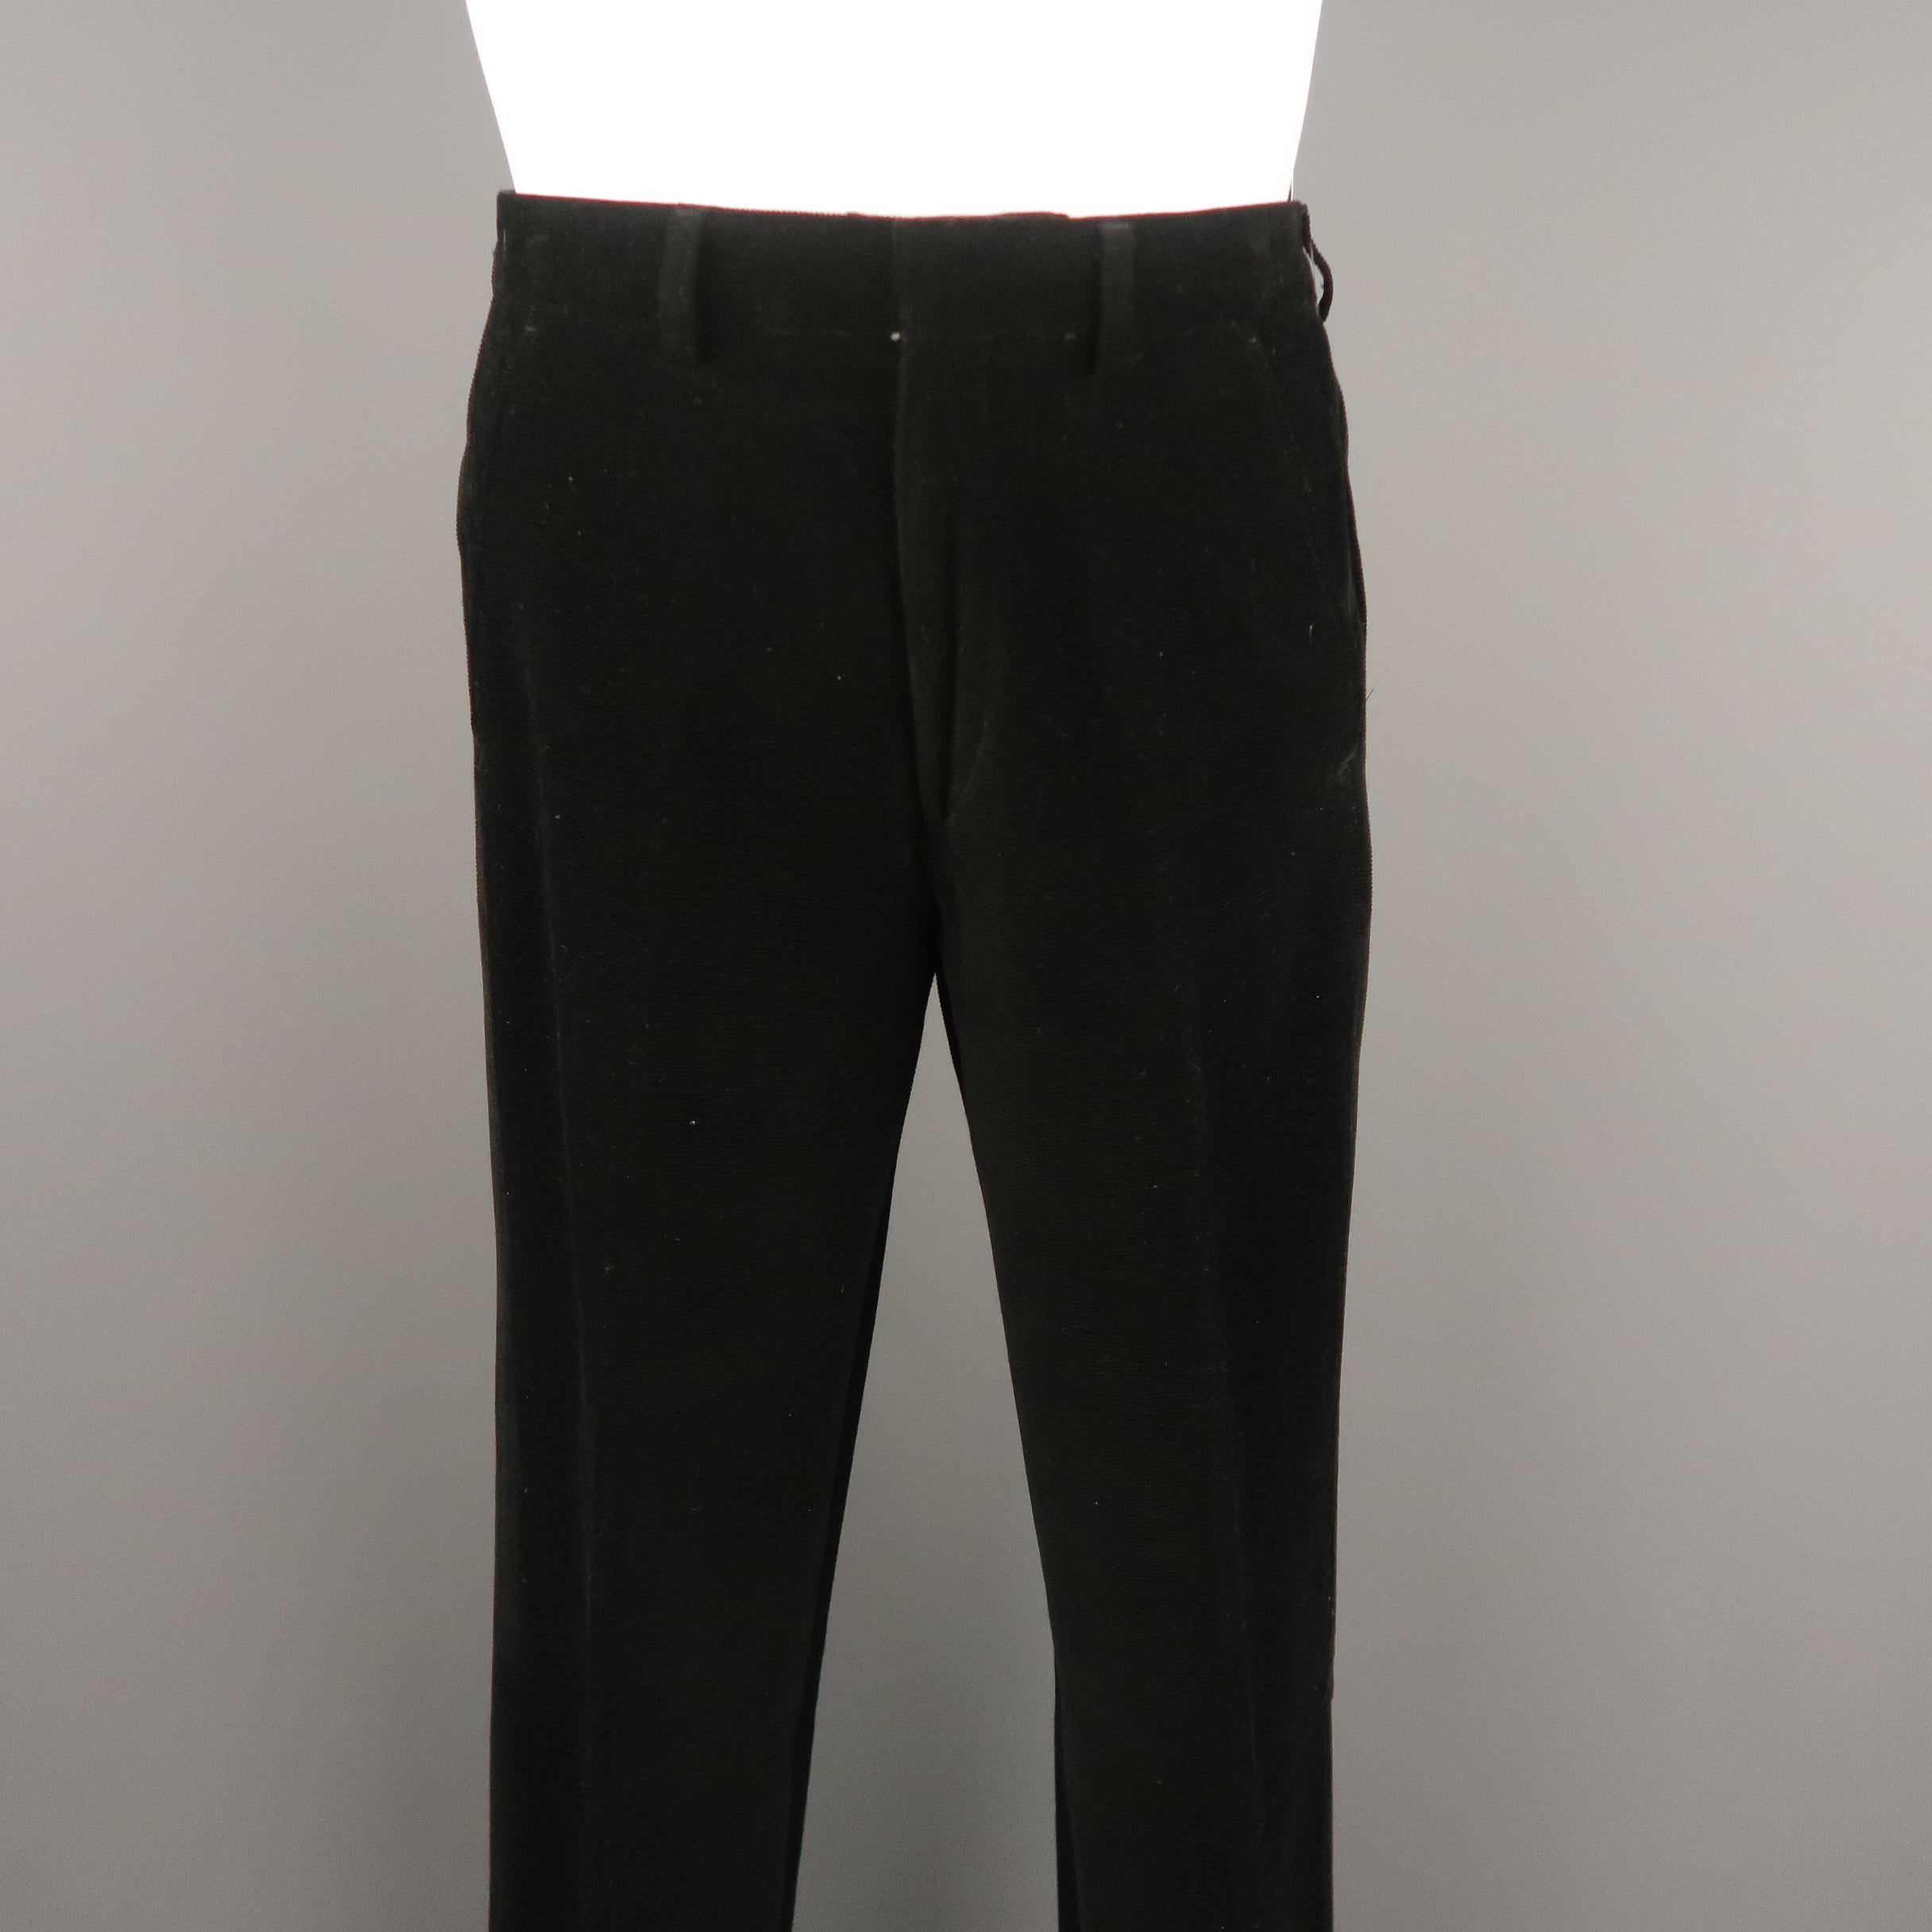 Vintage WILKES BASHFORD pants come in black micro corduroy with a hidden closure waistband and welt pocket. Unhemmed. Made in France.
 
Excellent Pre-Owned Condition.
Marked: 30
 
Measurements:
 
Waist: 31 in.
Rise: 10.5 in.
Inseam:  39 in.